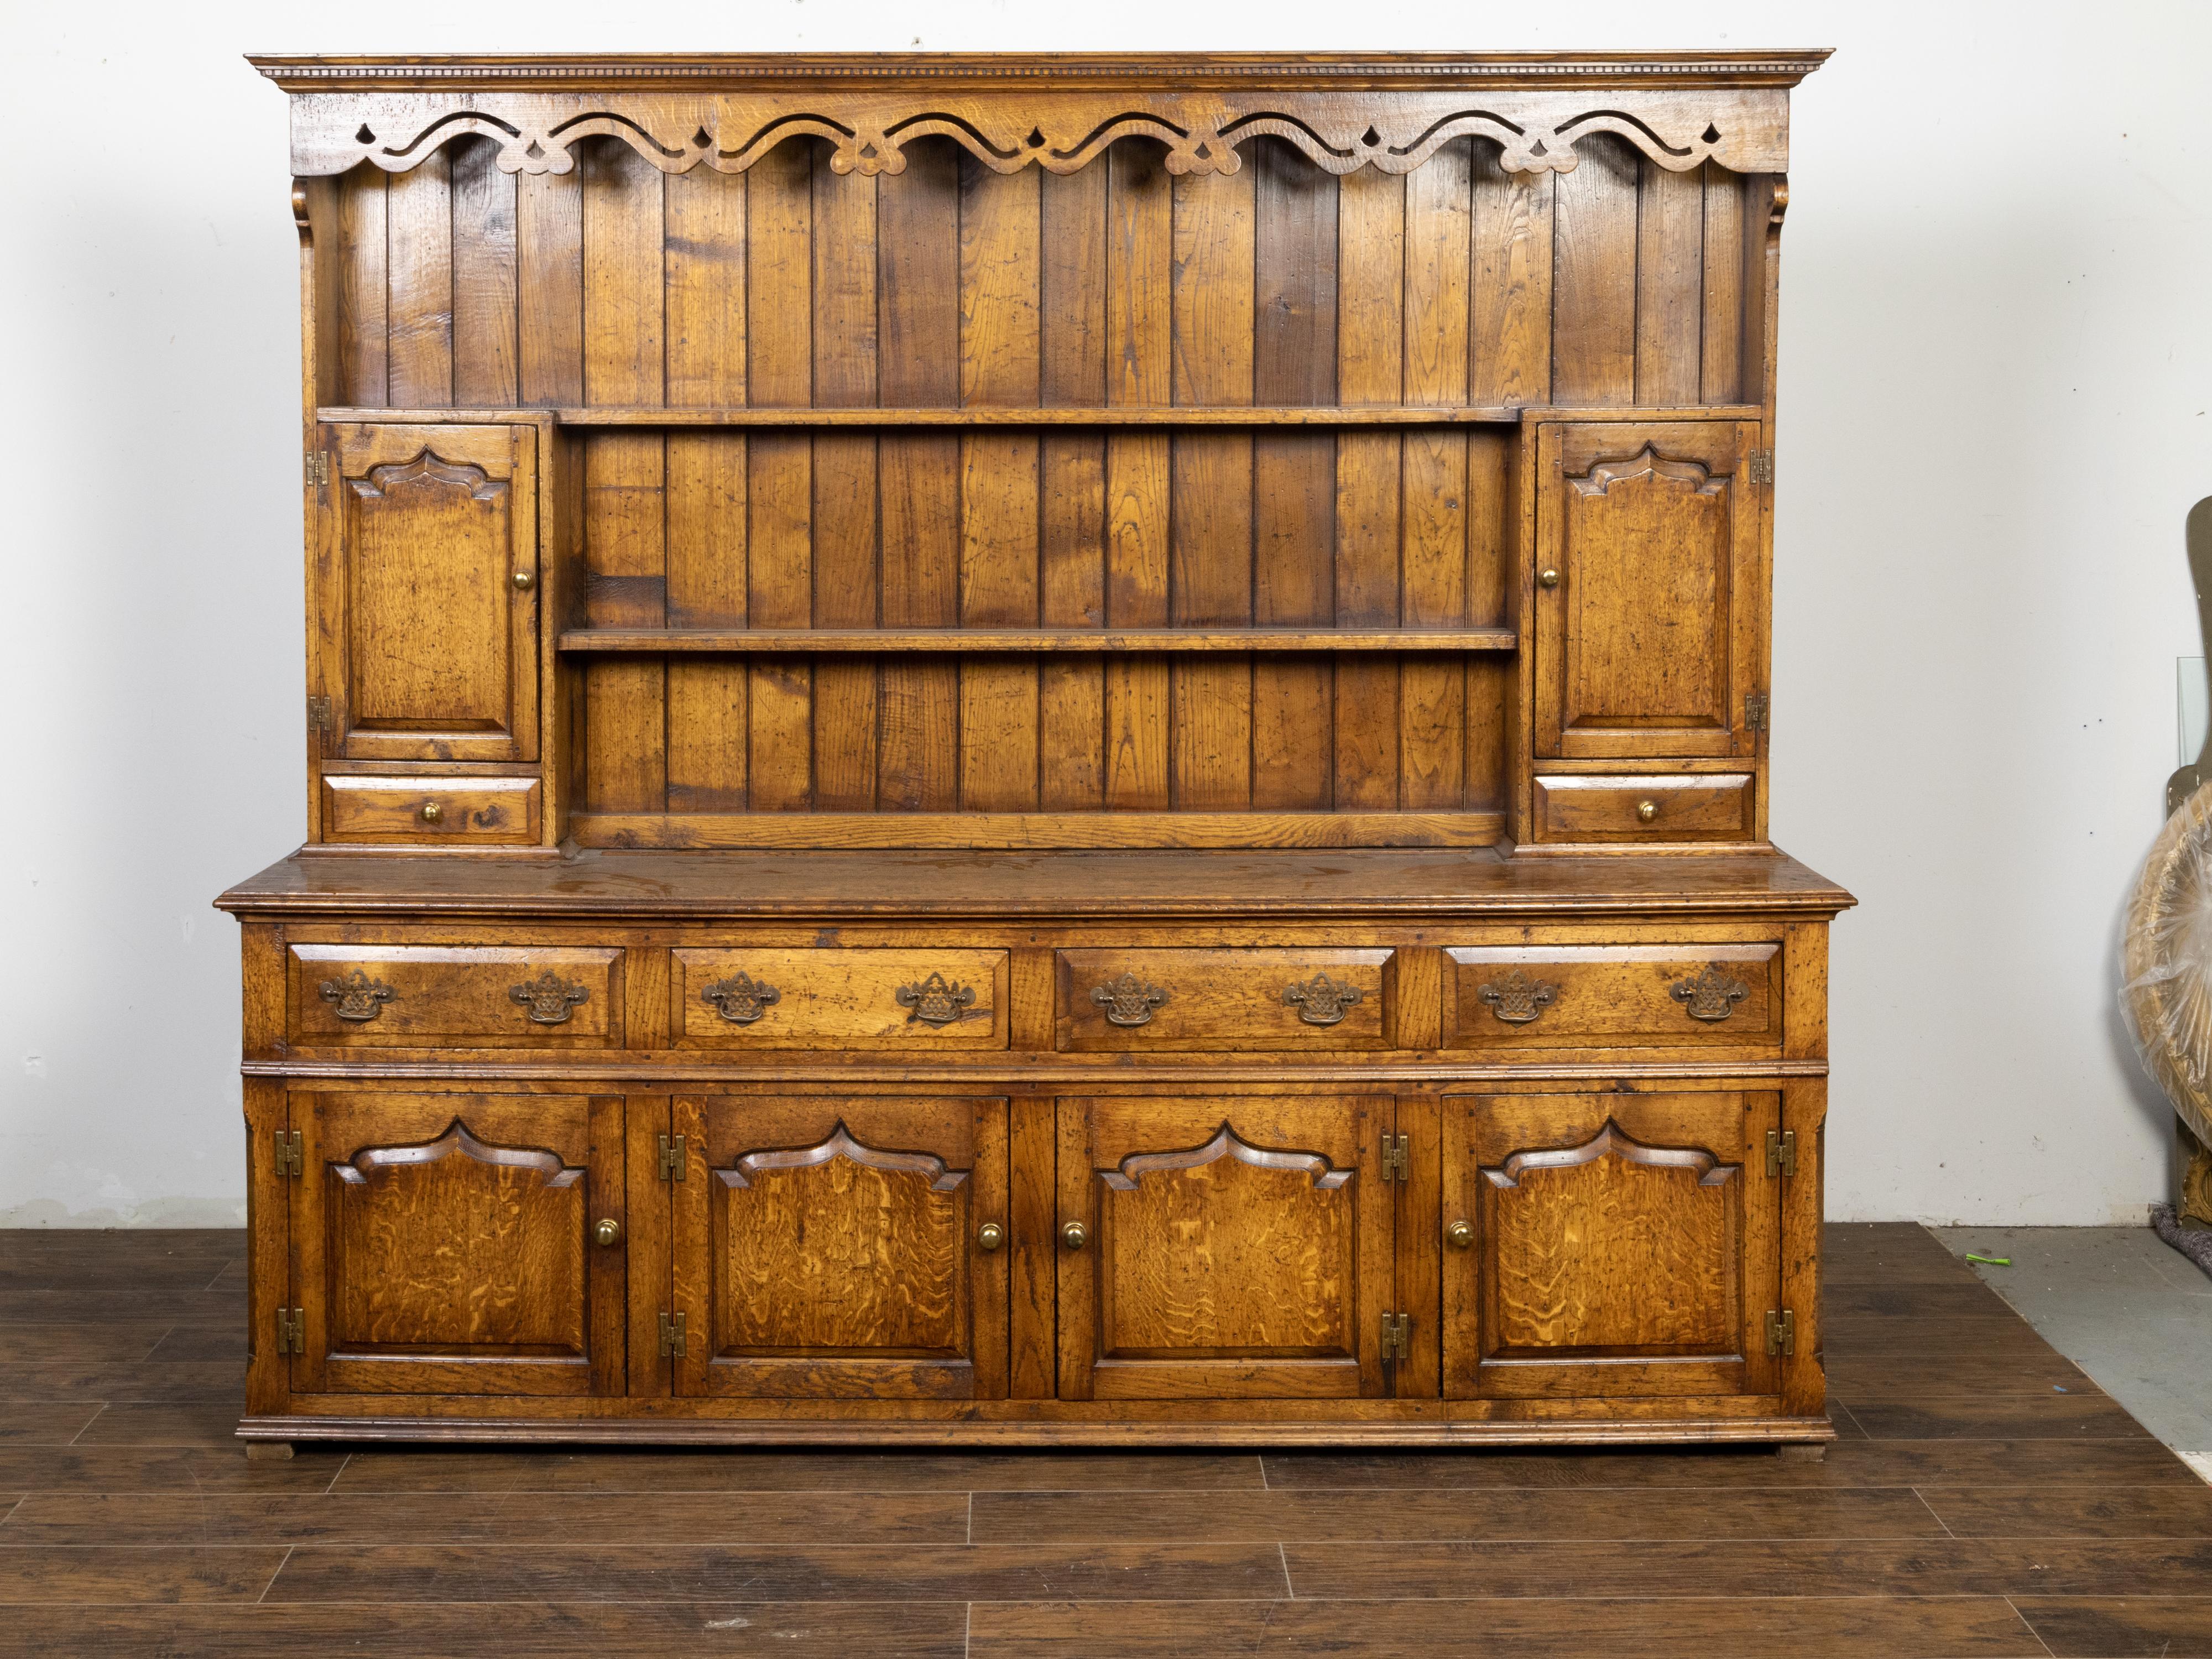 An English oak dresser from the mid 20th century, with dentil molding, carved cornice, open shelves, six doors and six drawers. Created in England during the Midcentury period, this oak dresser features a molded cornice with dentil molding and